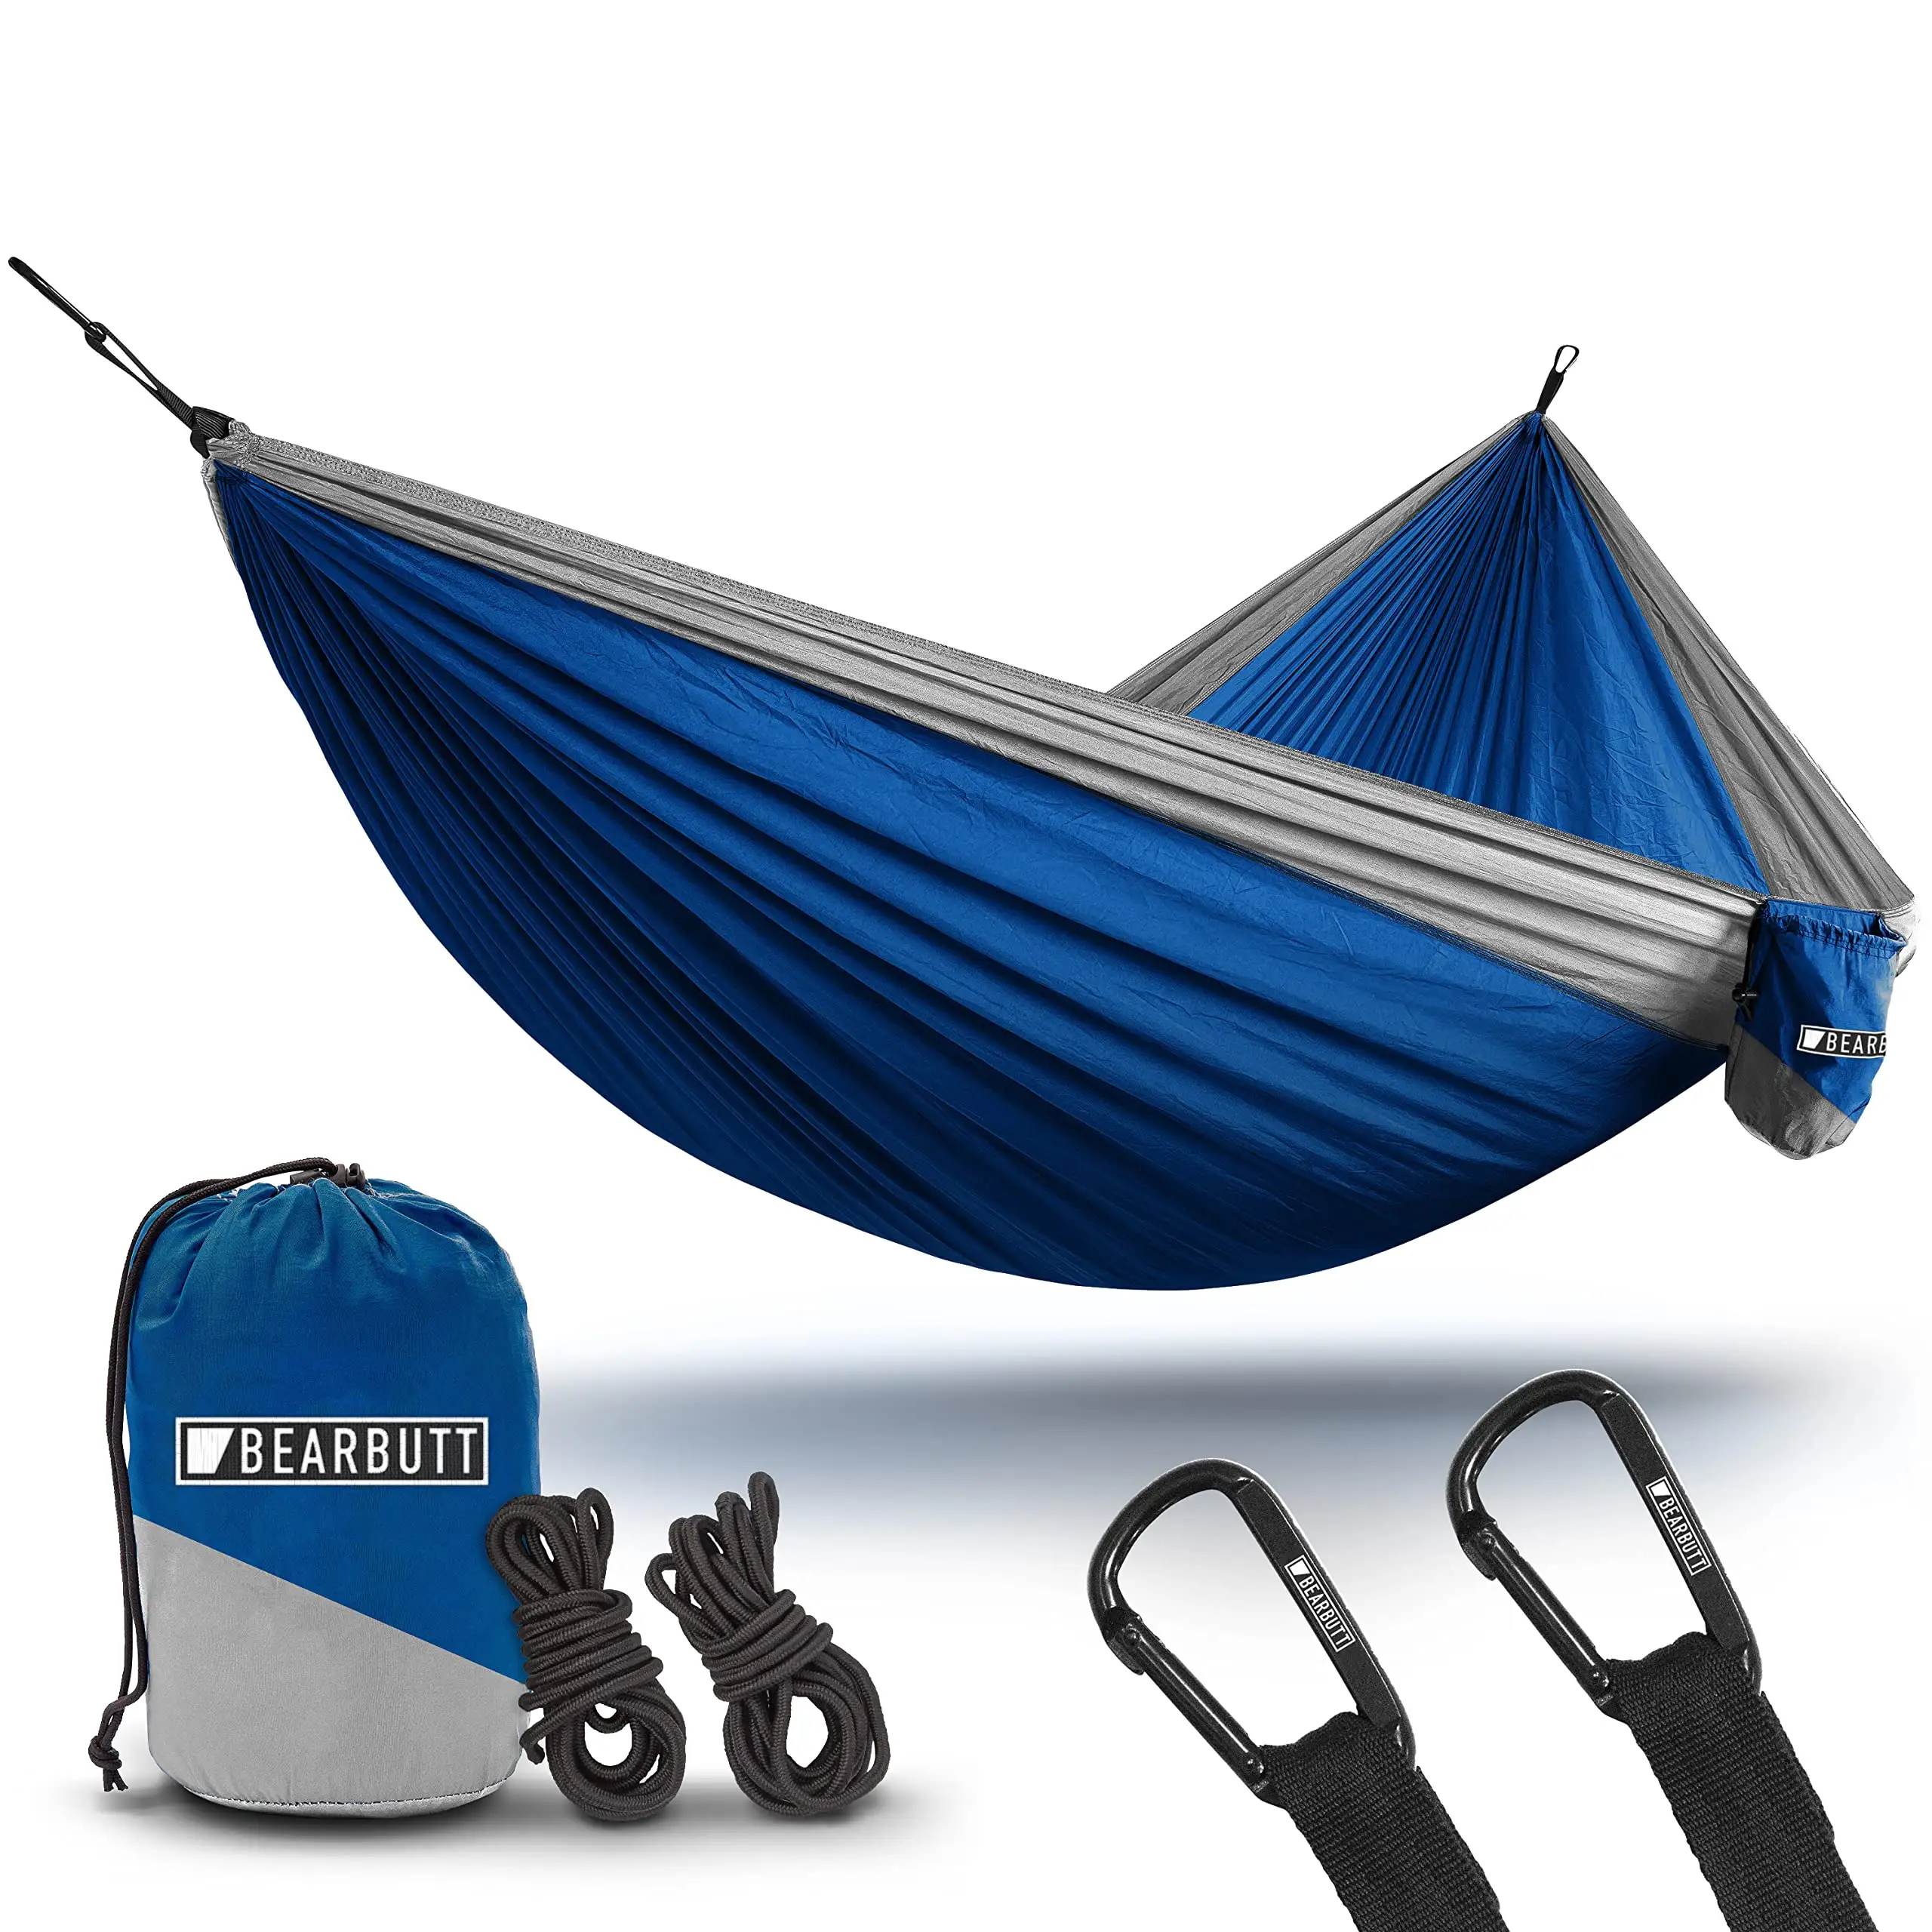 Camping Nylon Hammock chair Double person Portable Outdoor Backpacking Hiking Gear cat dog hammock tent